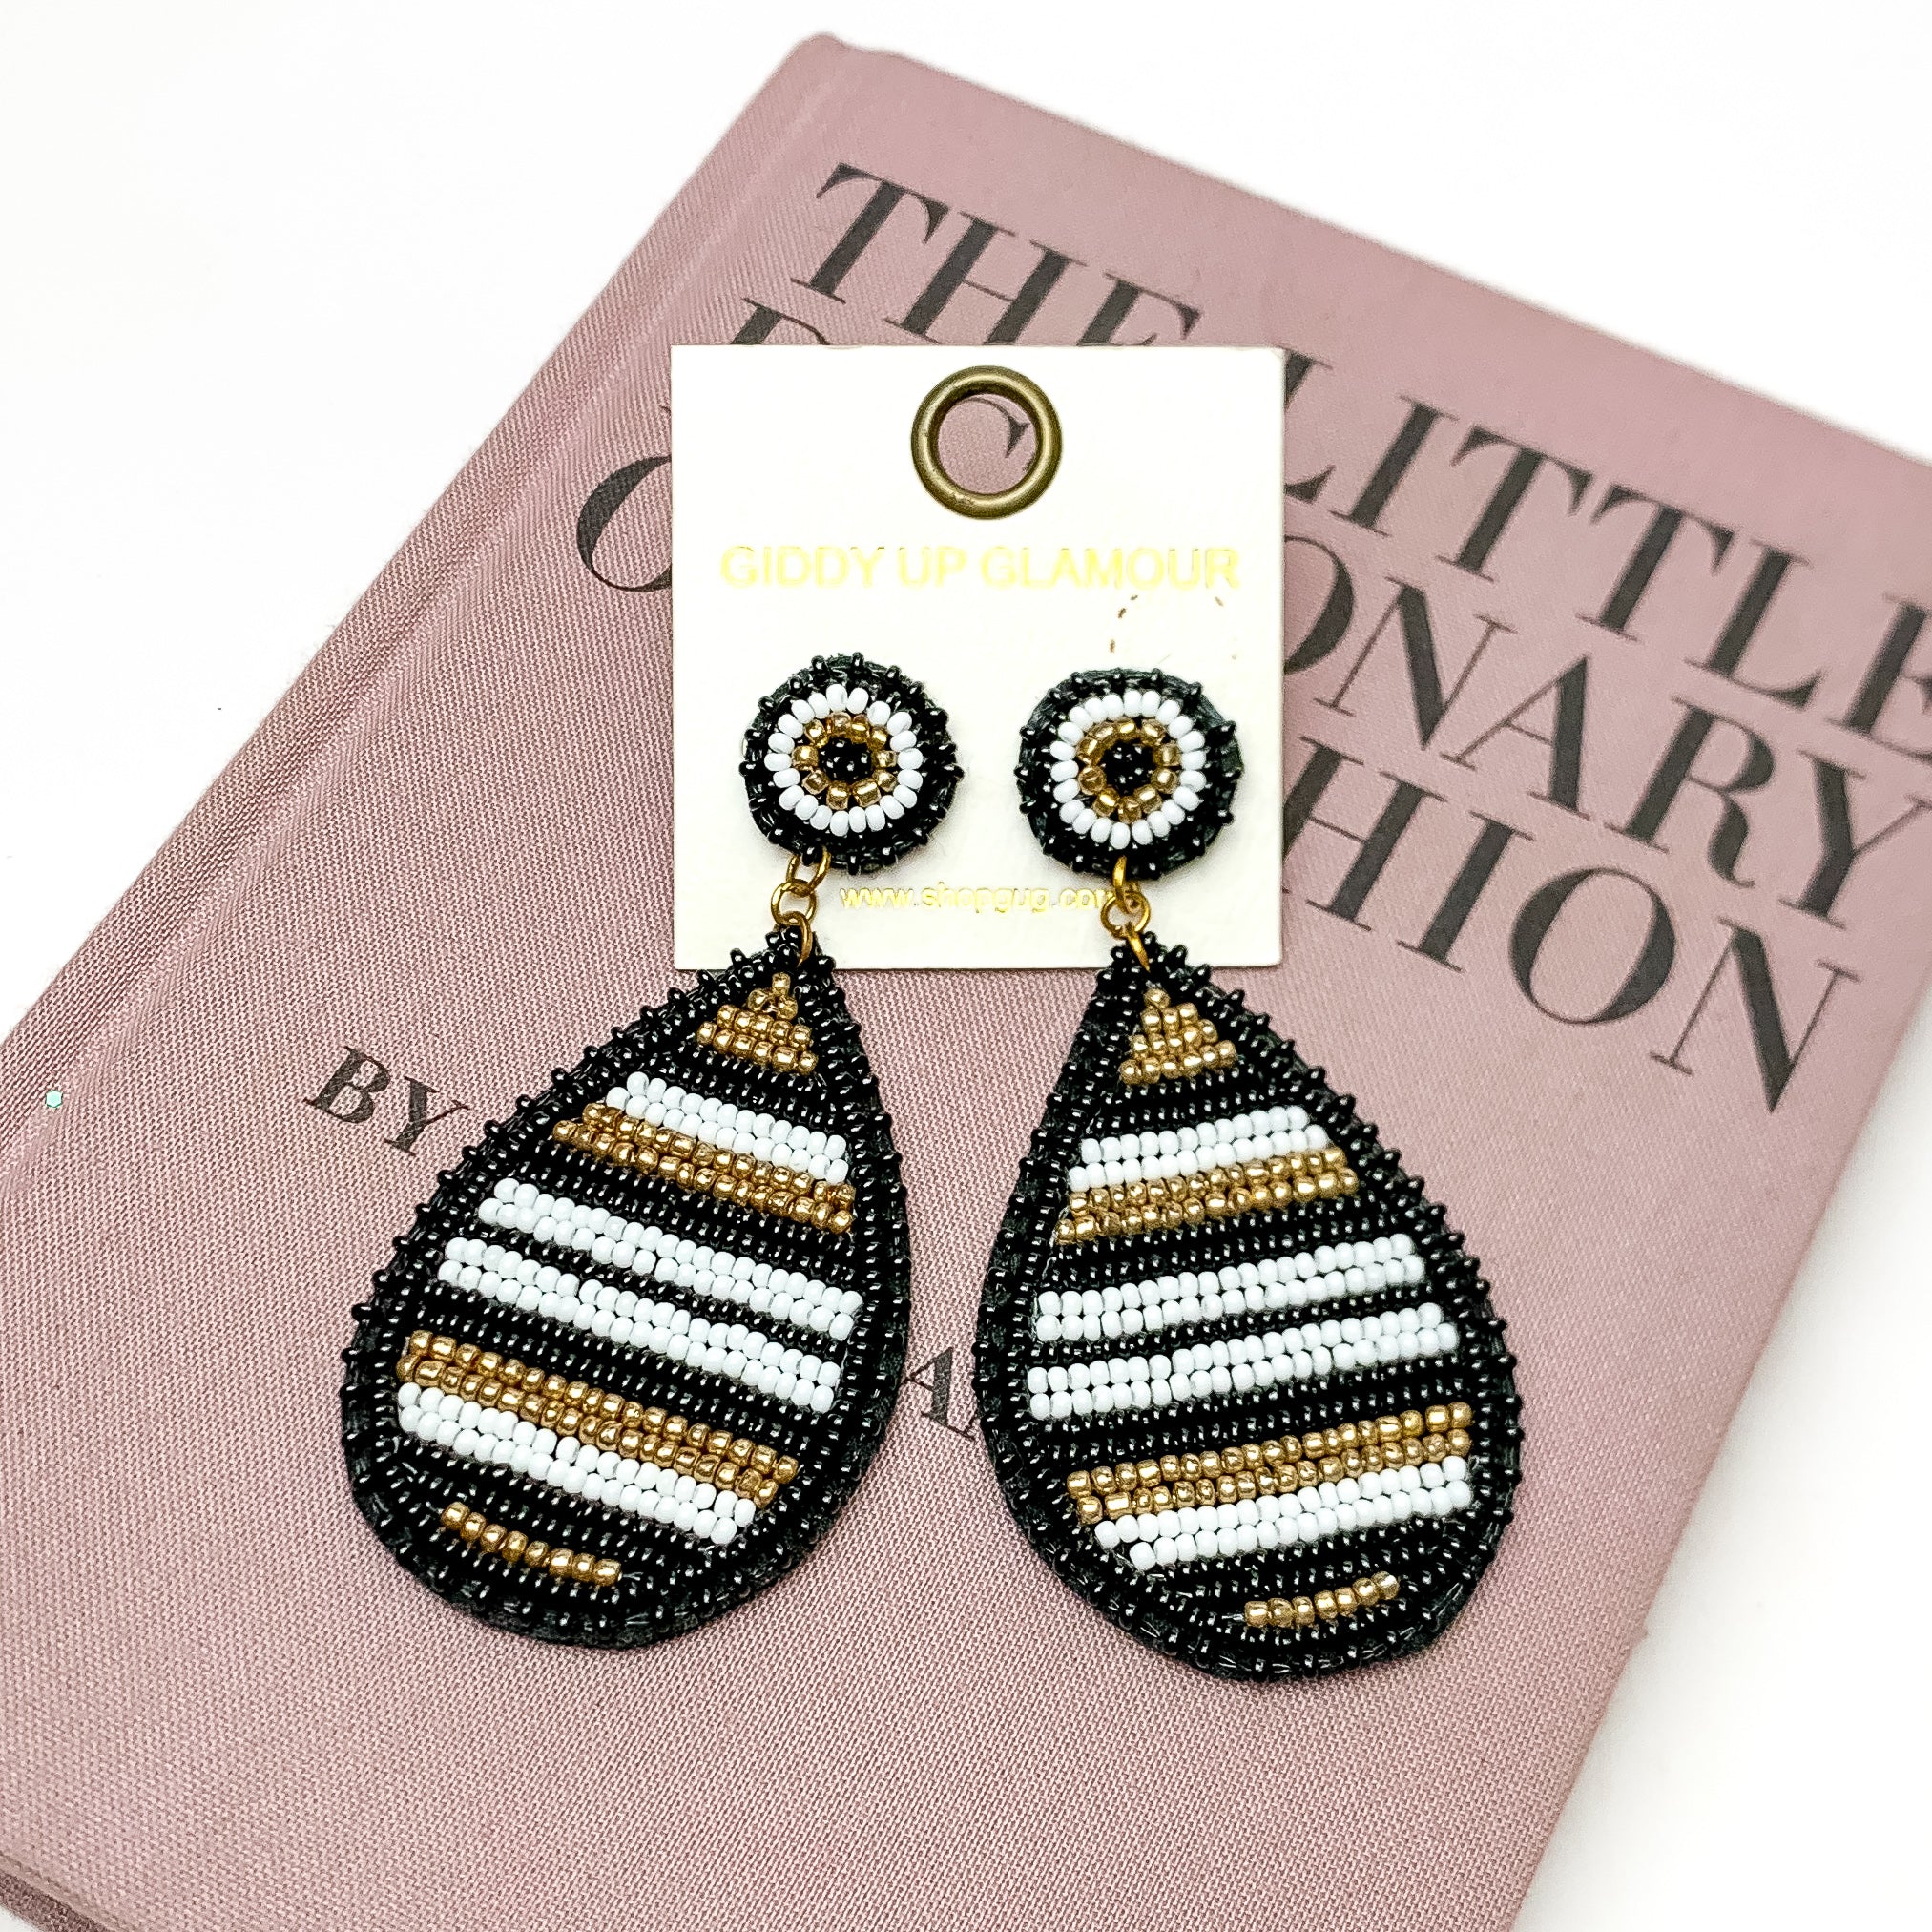 Beaded Striped Teardrop Earrings in Black Mix - Giddy Up Glamour Boutique